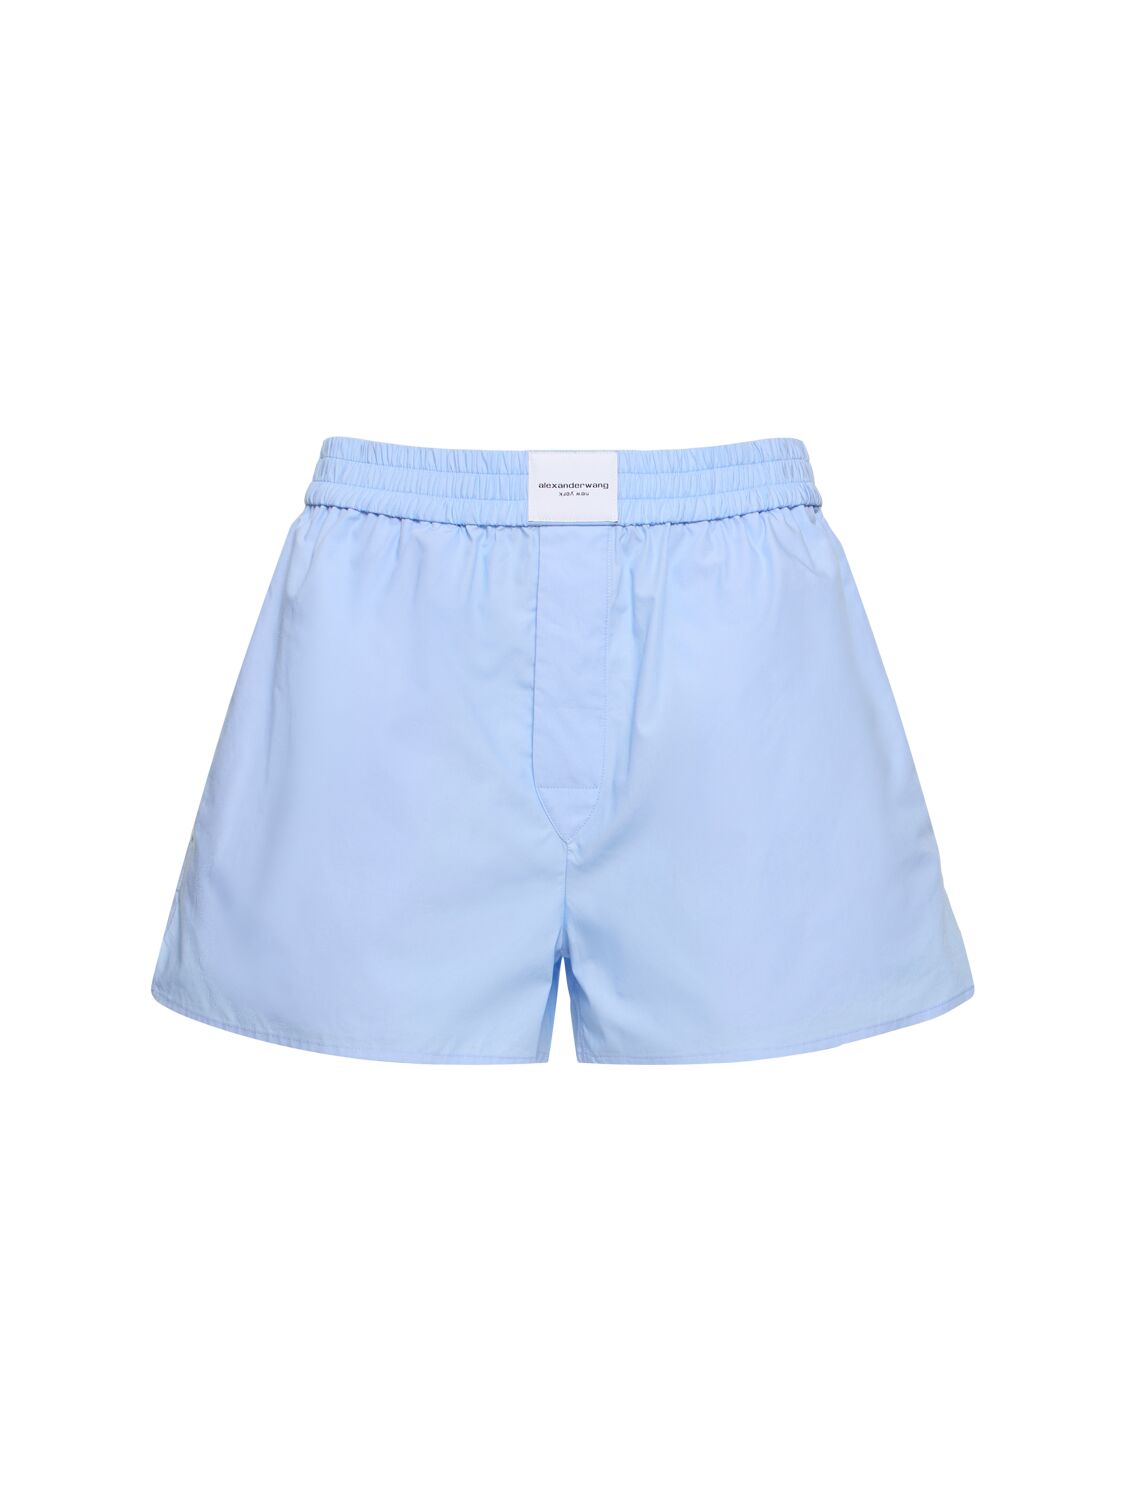 Alexander Wang Classic Cotton Boxer Shorts In Chambray Blue